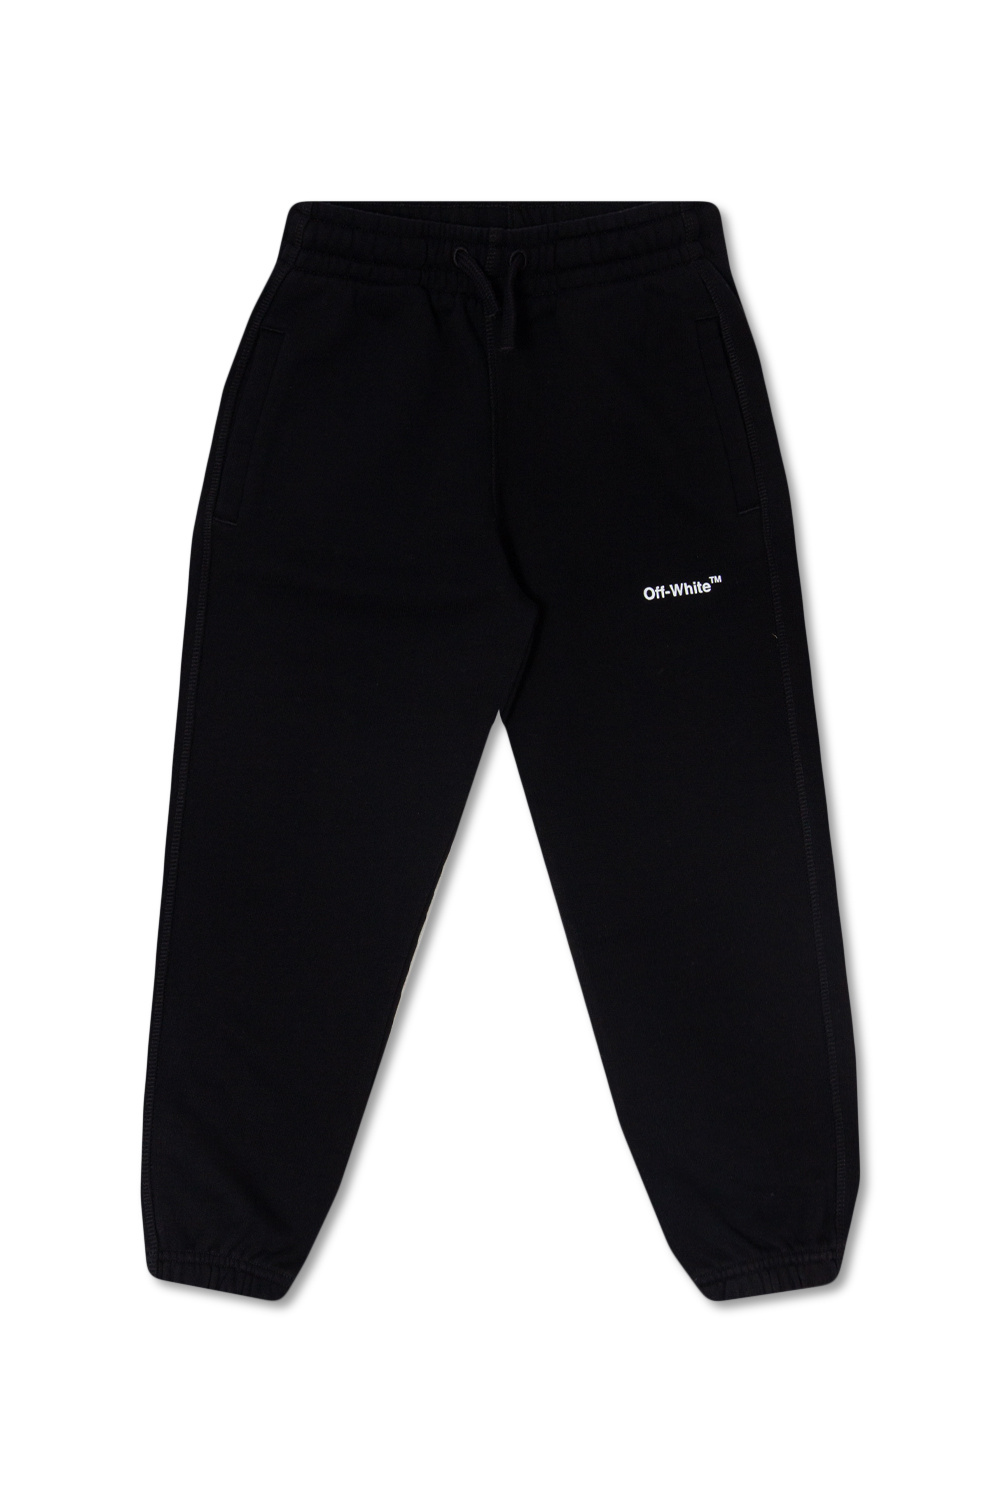 Skinny French Terry Sweatpant Black - Unisex - Made in Canada